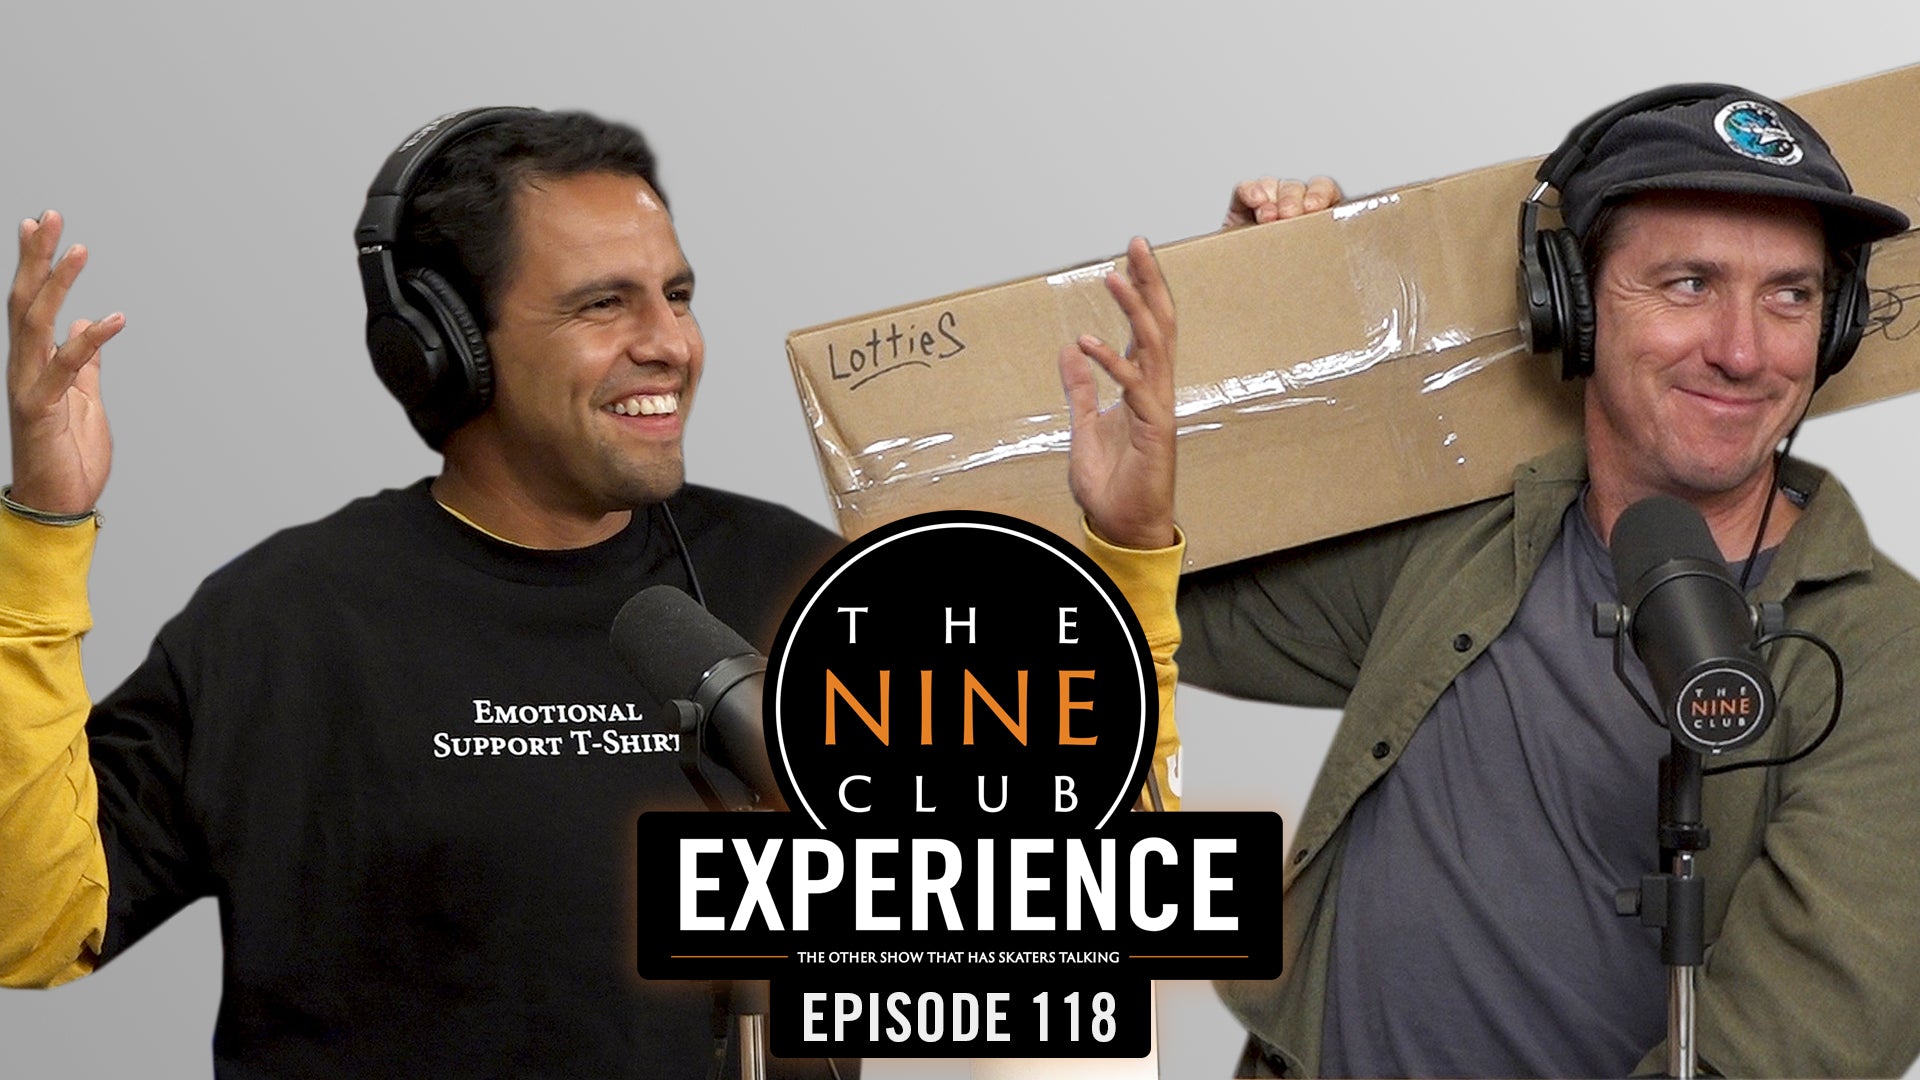 The Nine Club Experience Episode 118